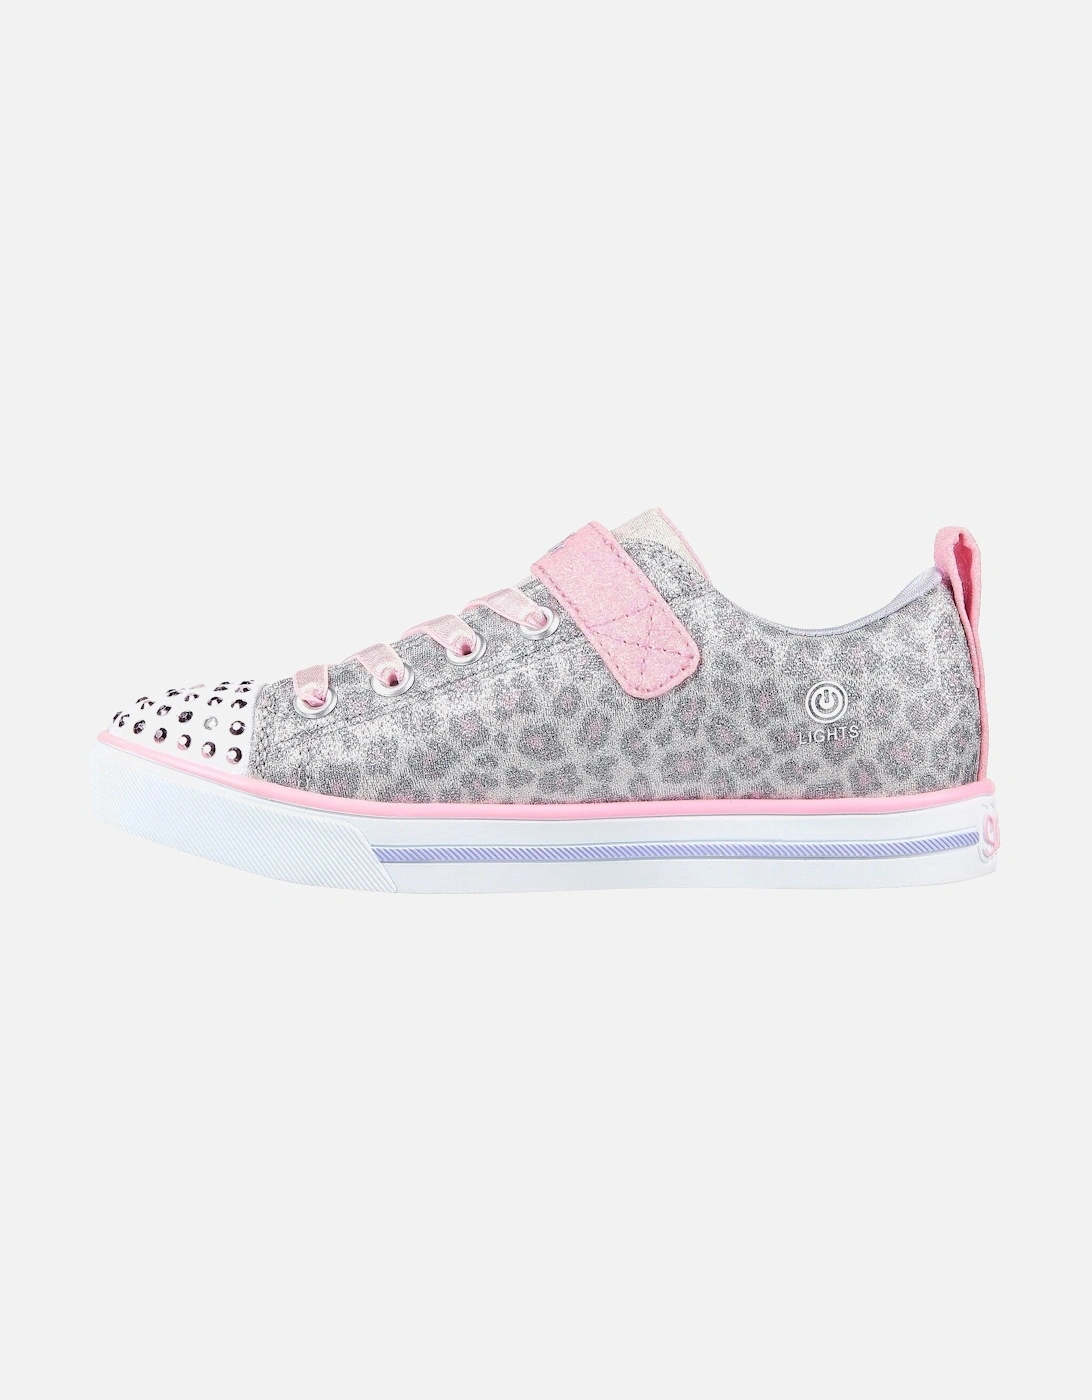 Childrens/Kids Twinkle Toes Sparkle Lite Leopard Shoes